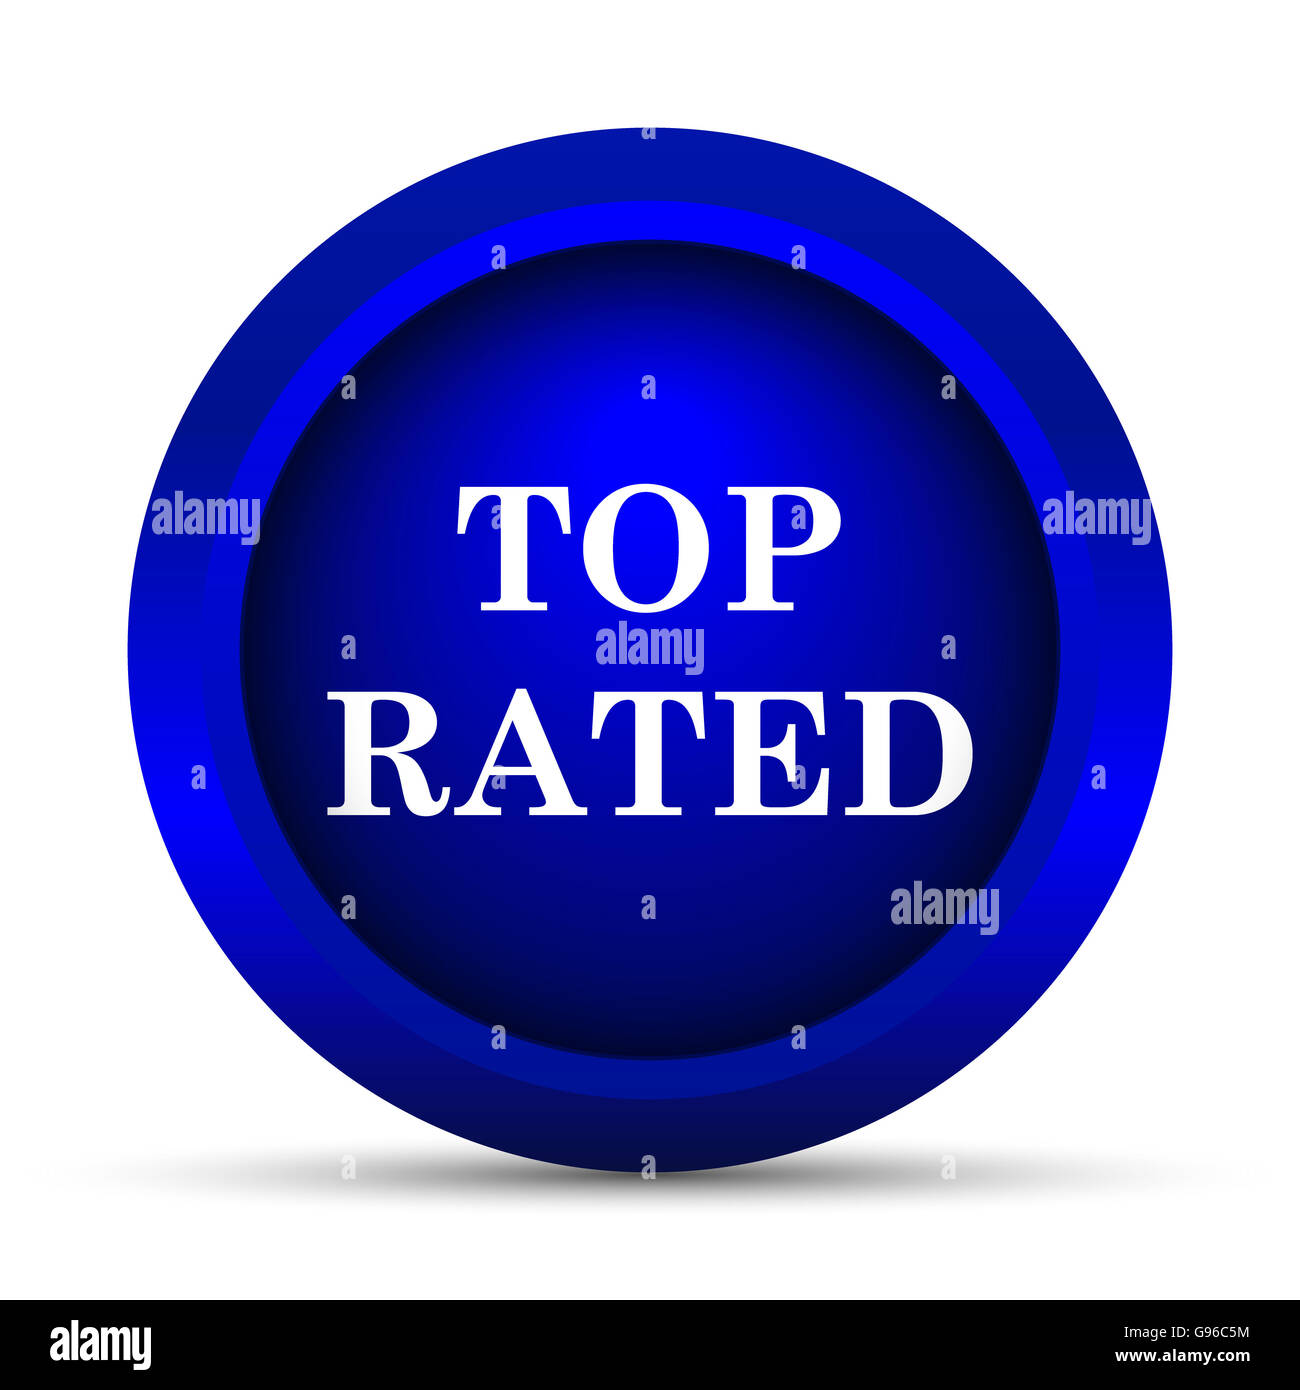 Top rated icon Cut Out Stock Images & Pictures - Alamy